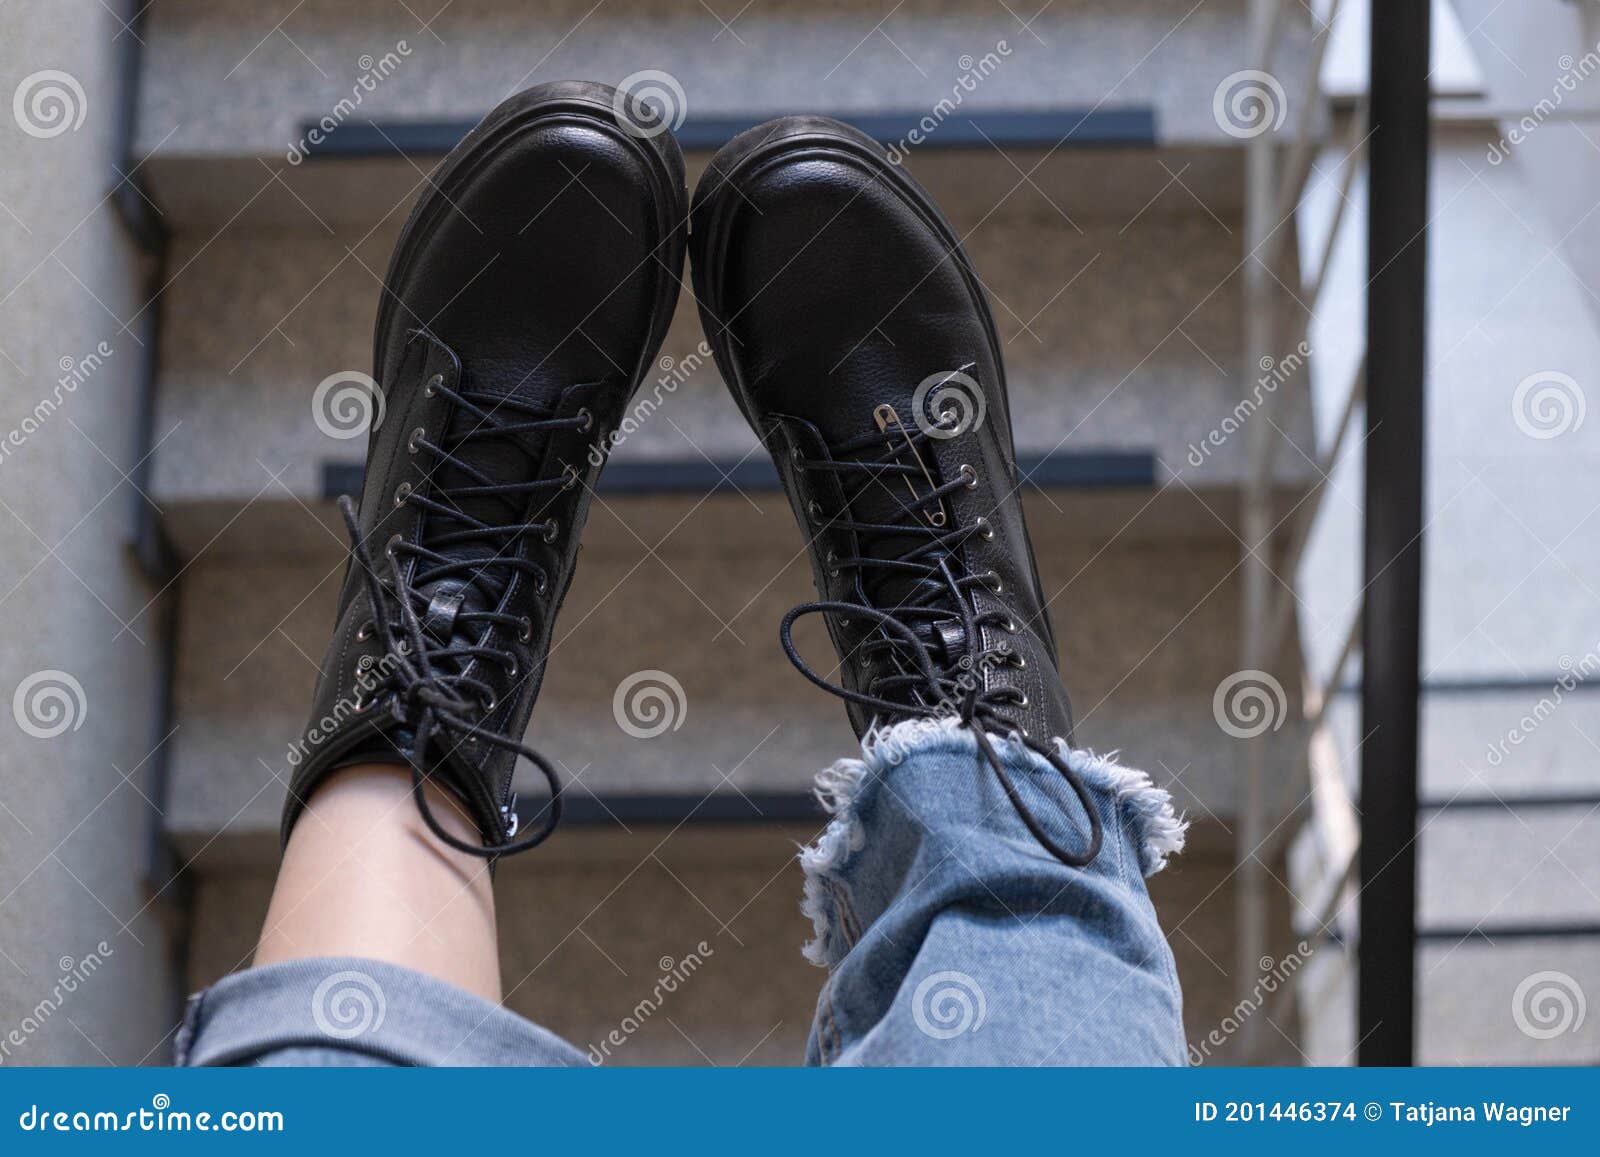 Dangling Legs of a Teenage Girl in Black Boots Stock Photo - Image of ...